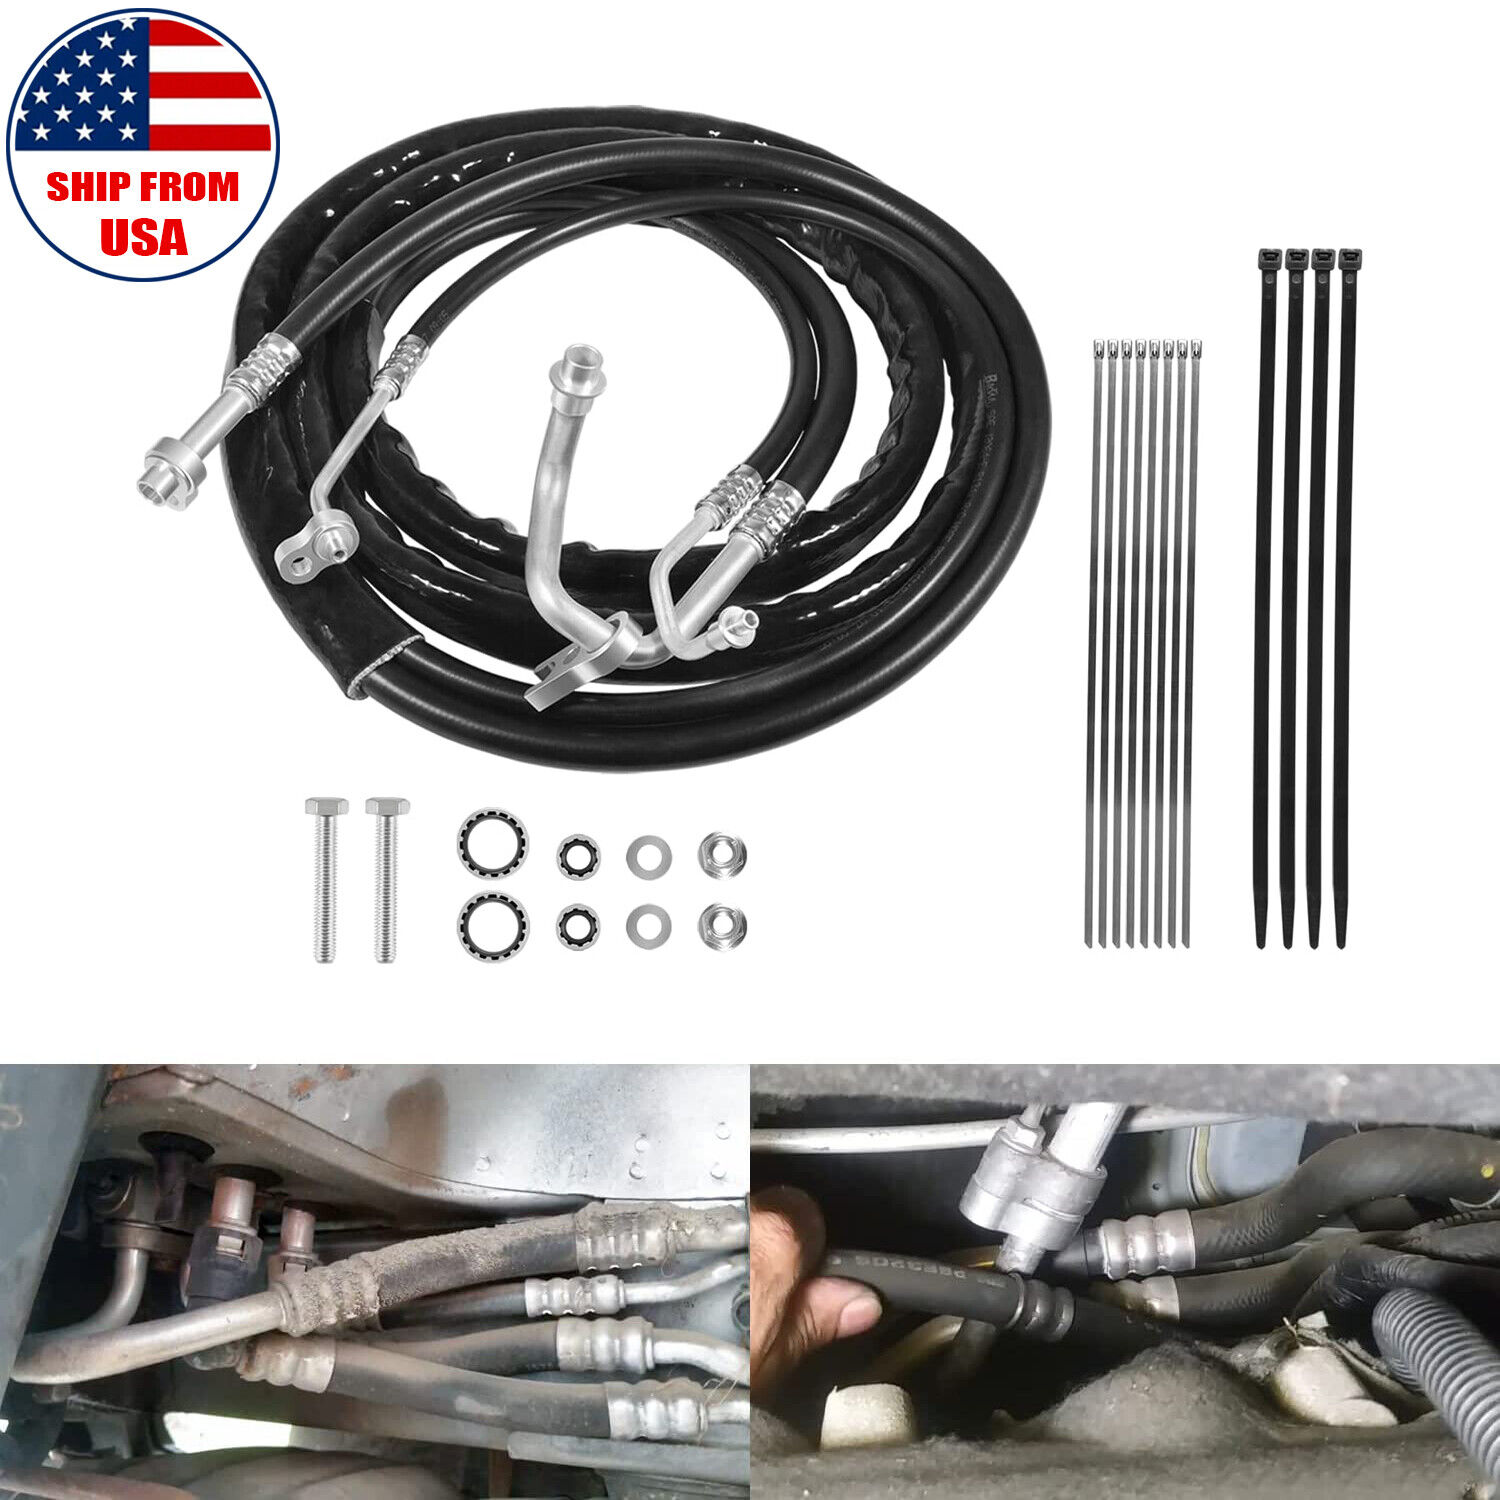 AT34653 REAR AC LINE REPLACEMENT LINES FOR ACADIA, TRAVERSE, ENCLAVE 2007-2017